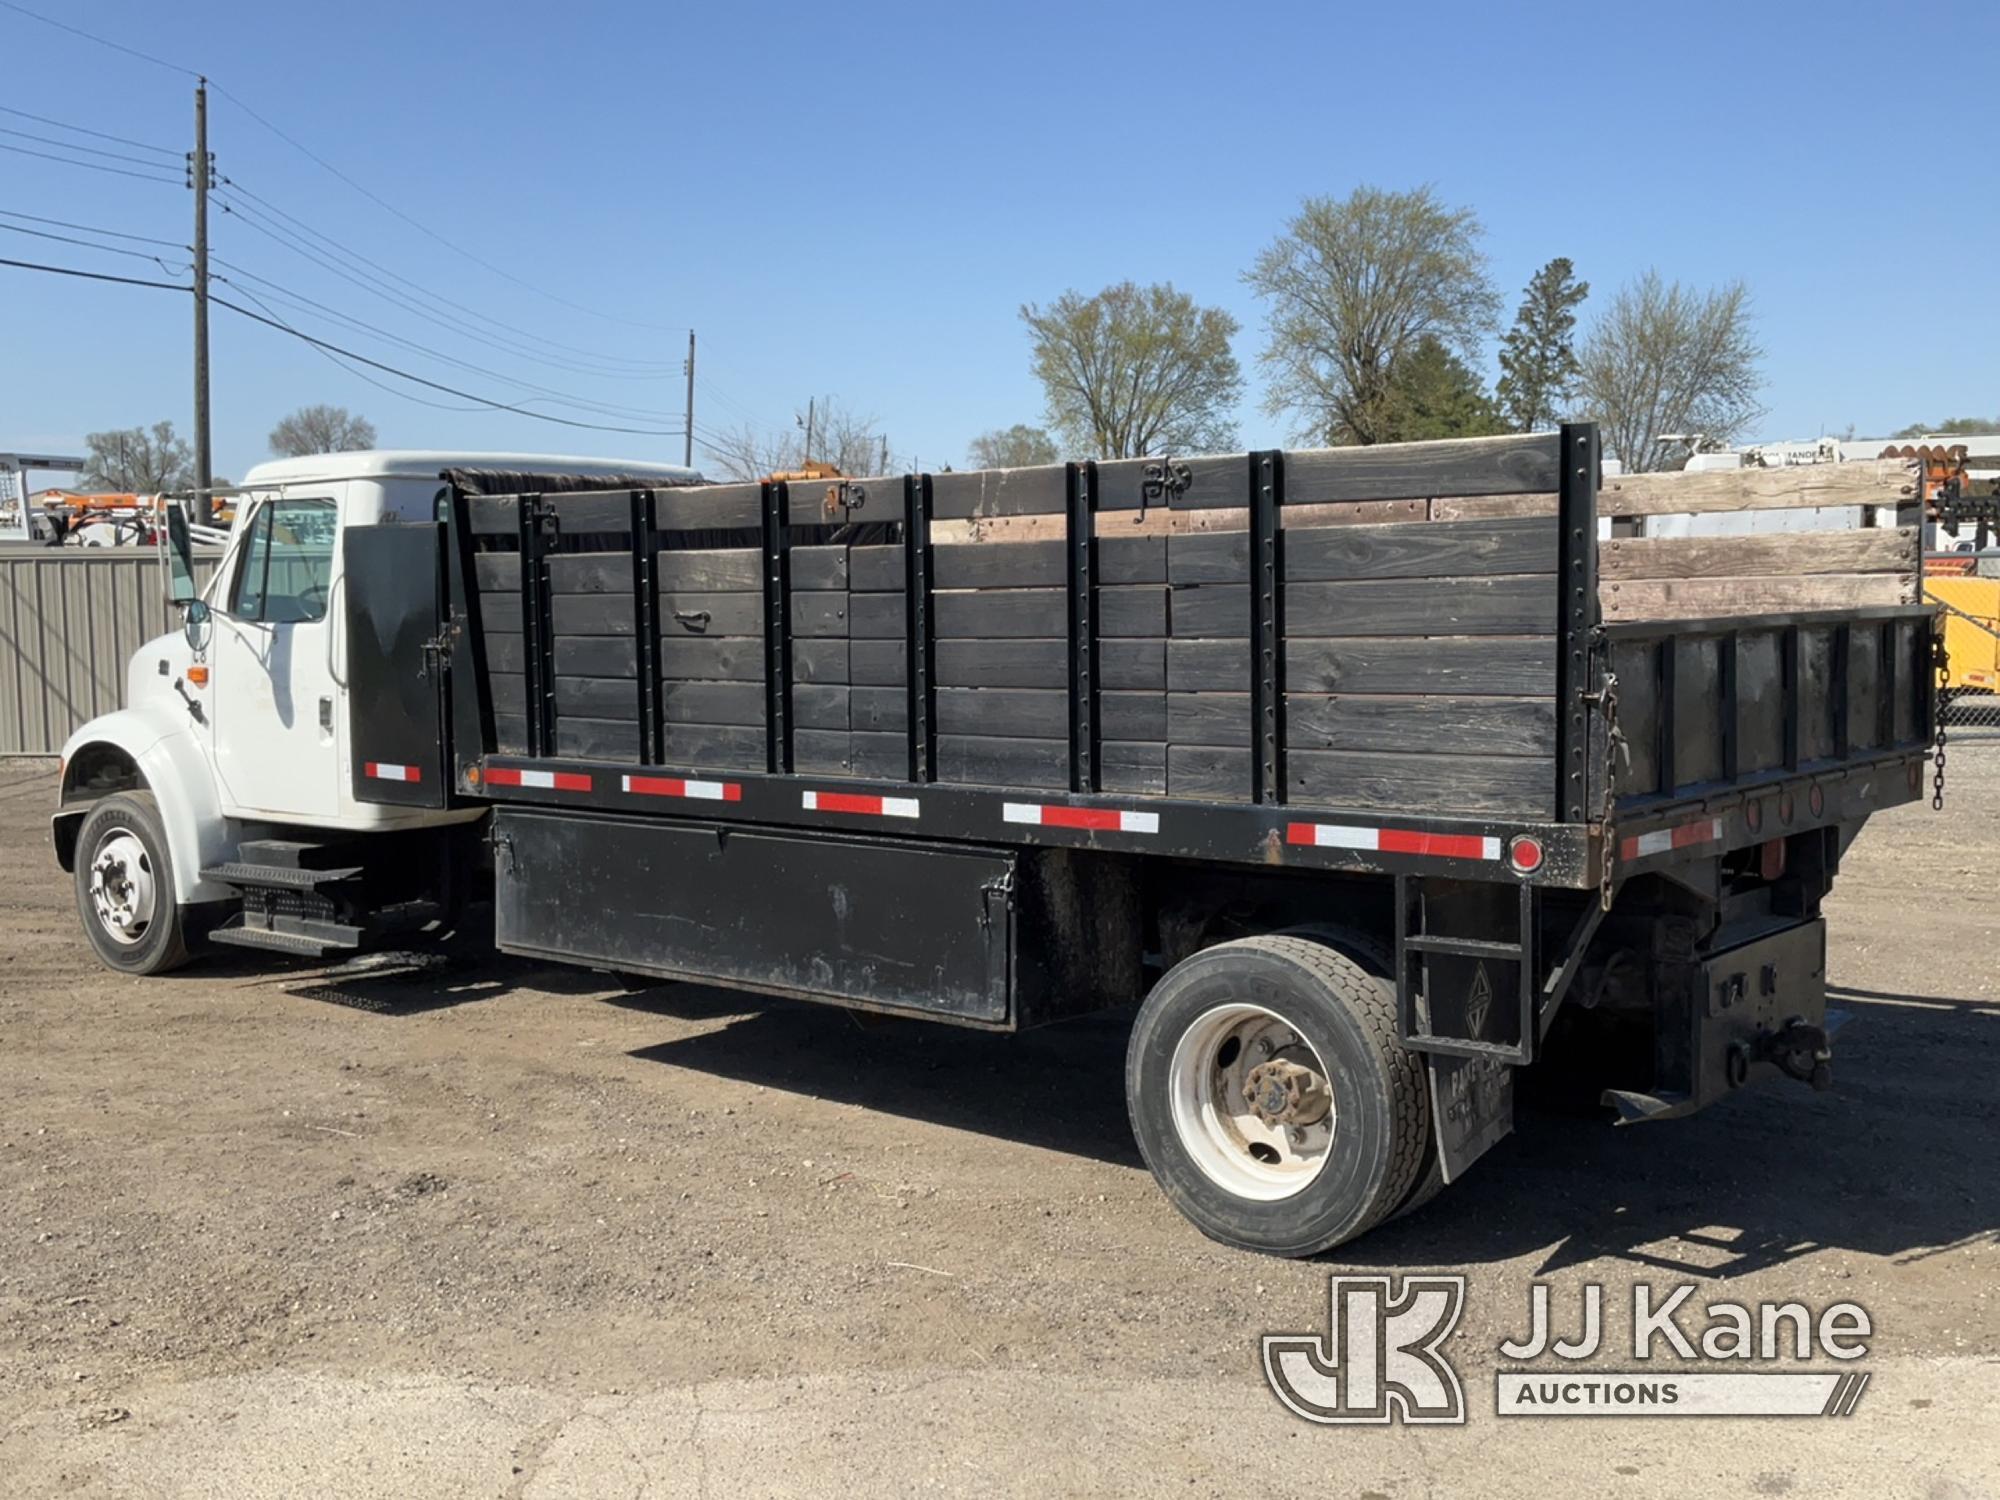 (South Beloit, IL) 2002 International 4700 Dump Flatbed Truck Runs & Moves) (PTO Operates But Has Hy